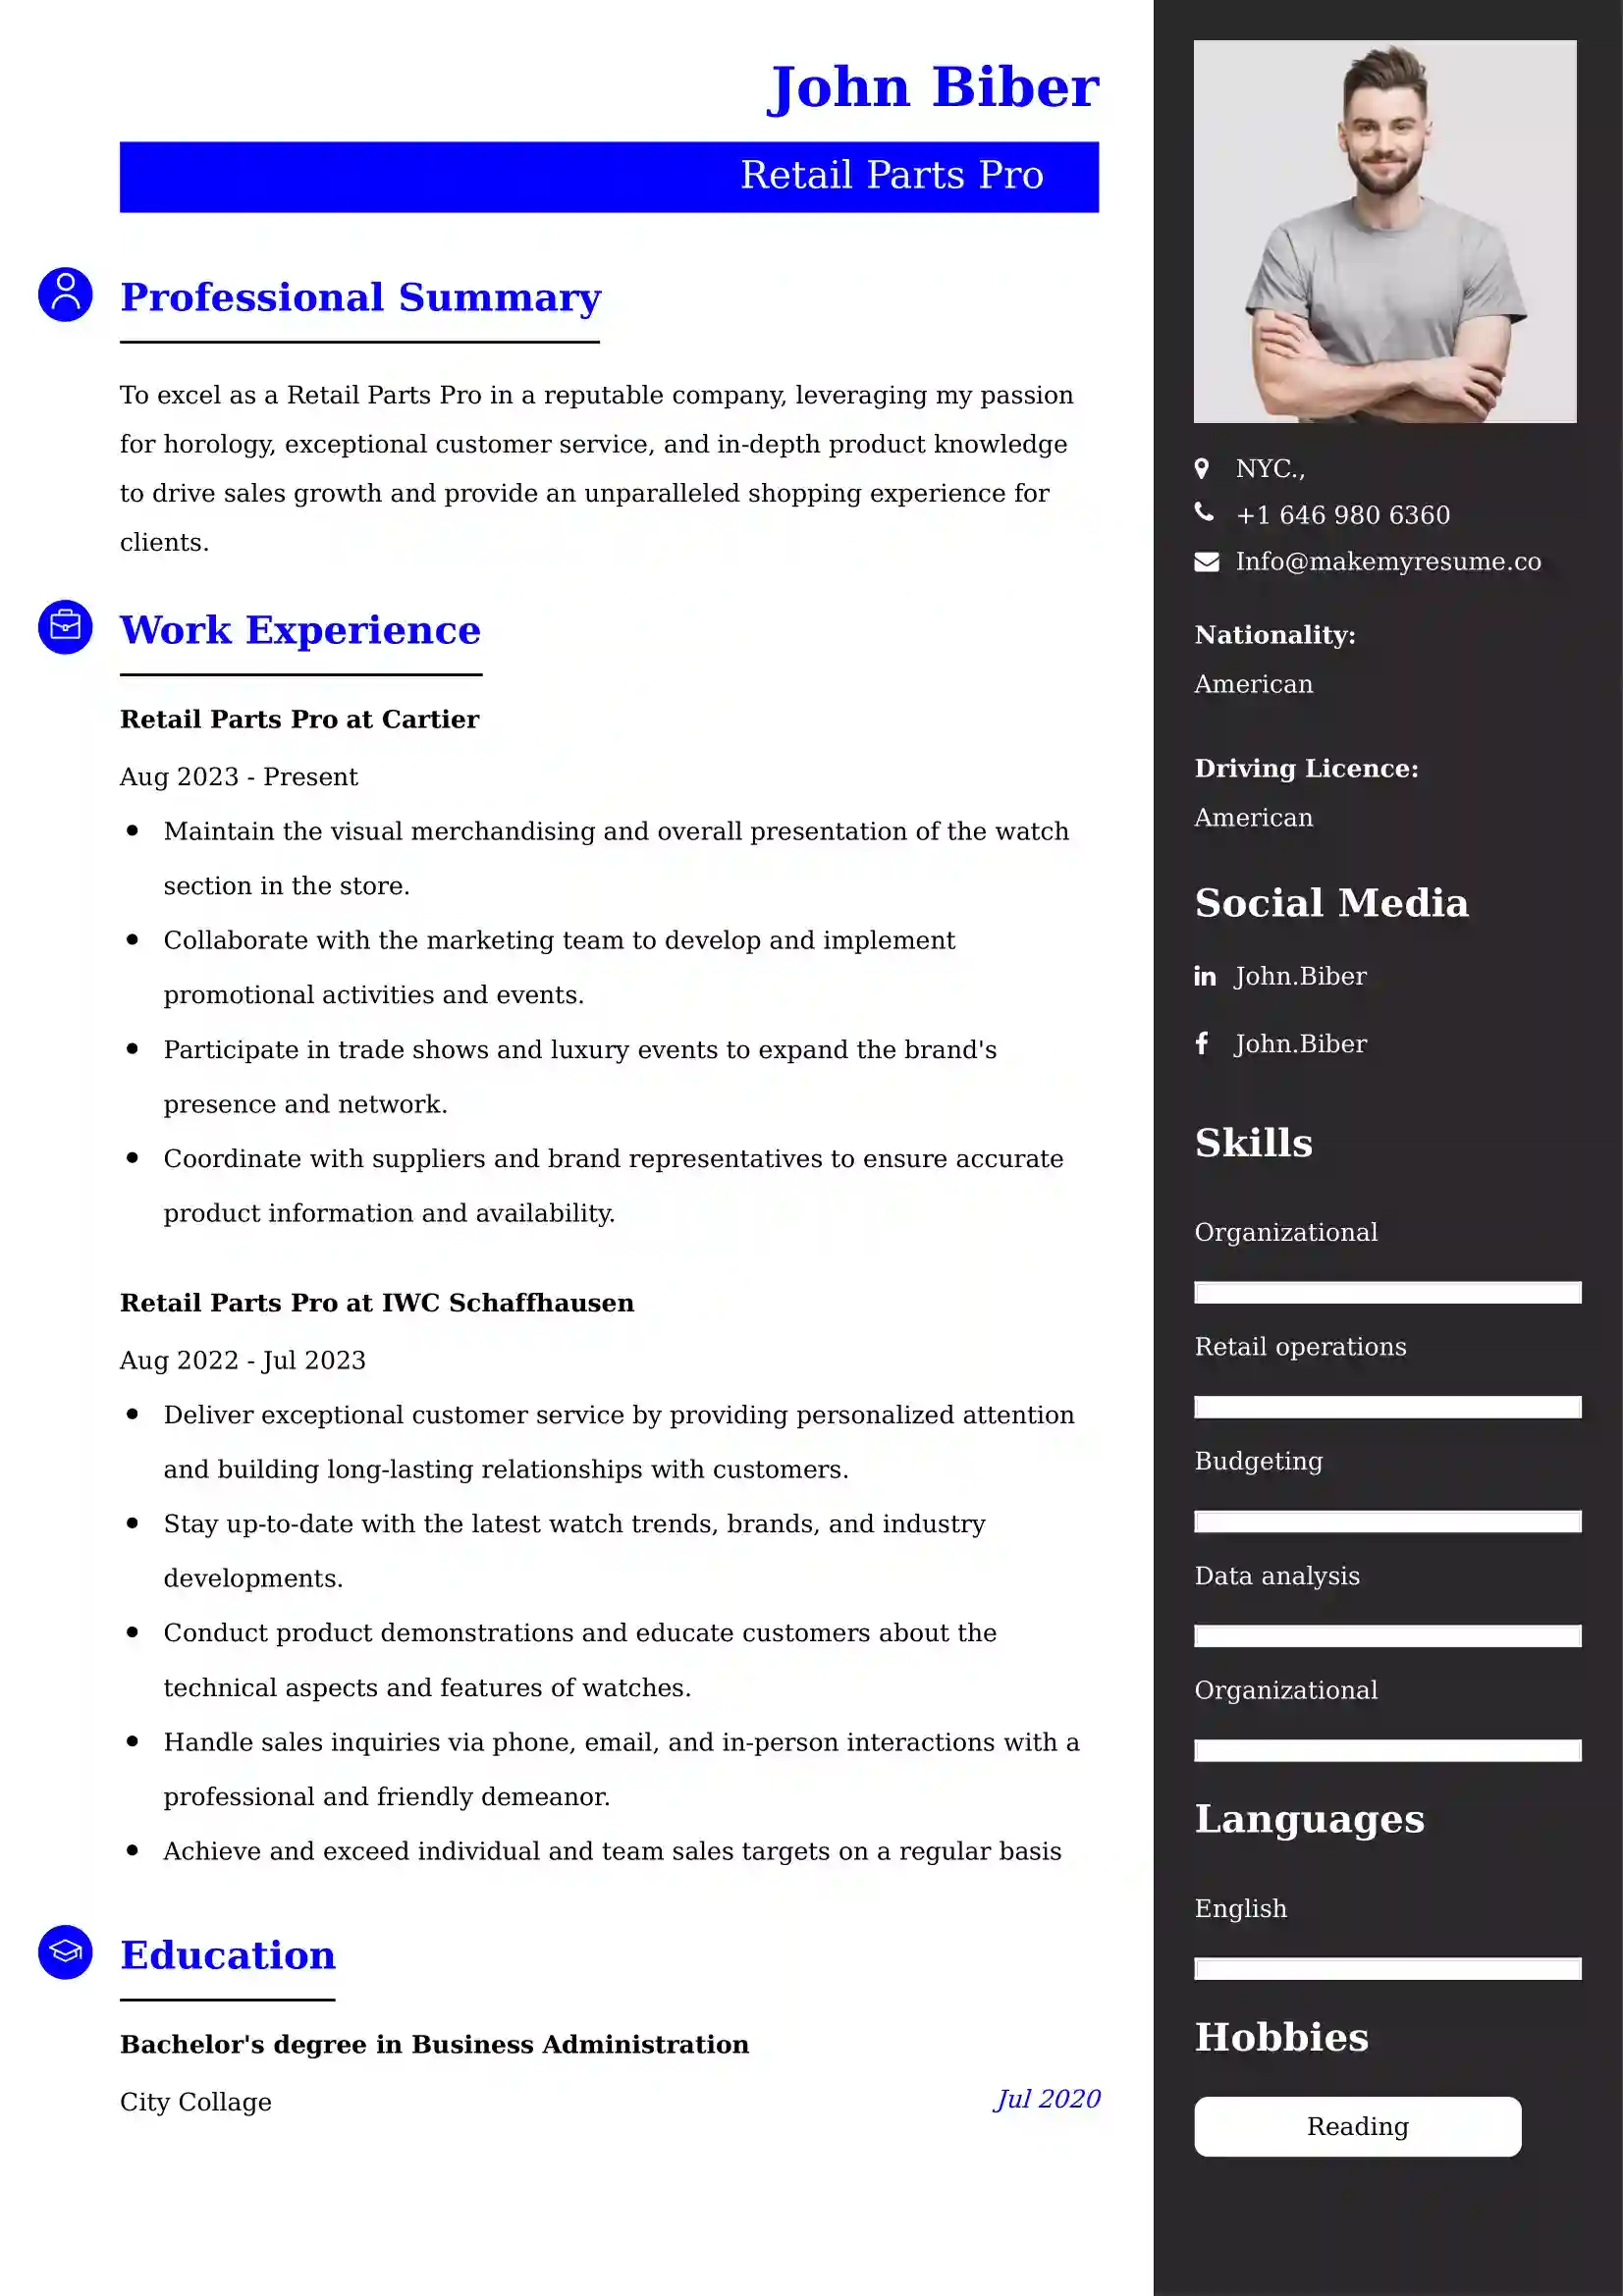 Retail Parts Pro Resume Examples - UK Format, Latest Template.